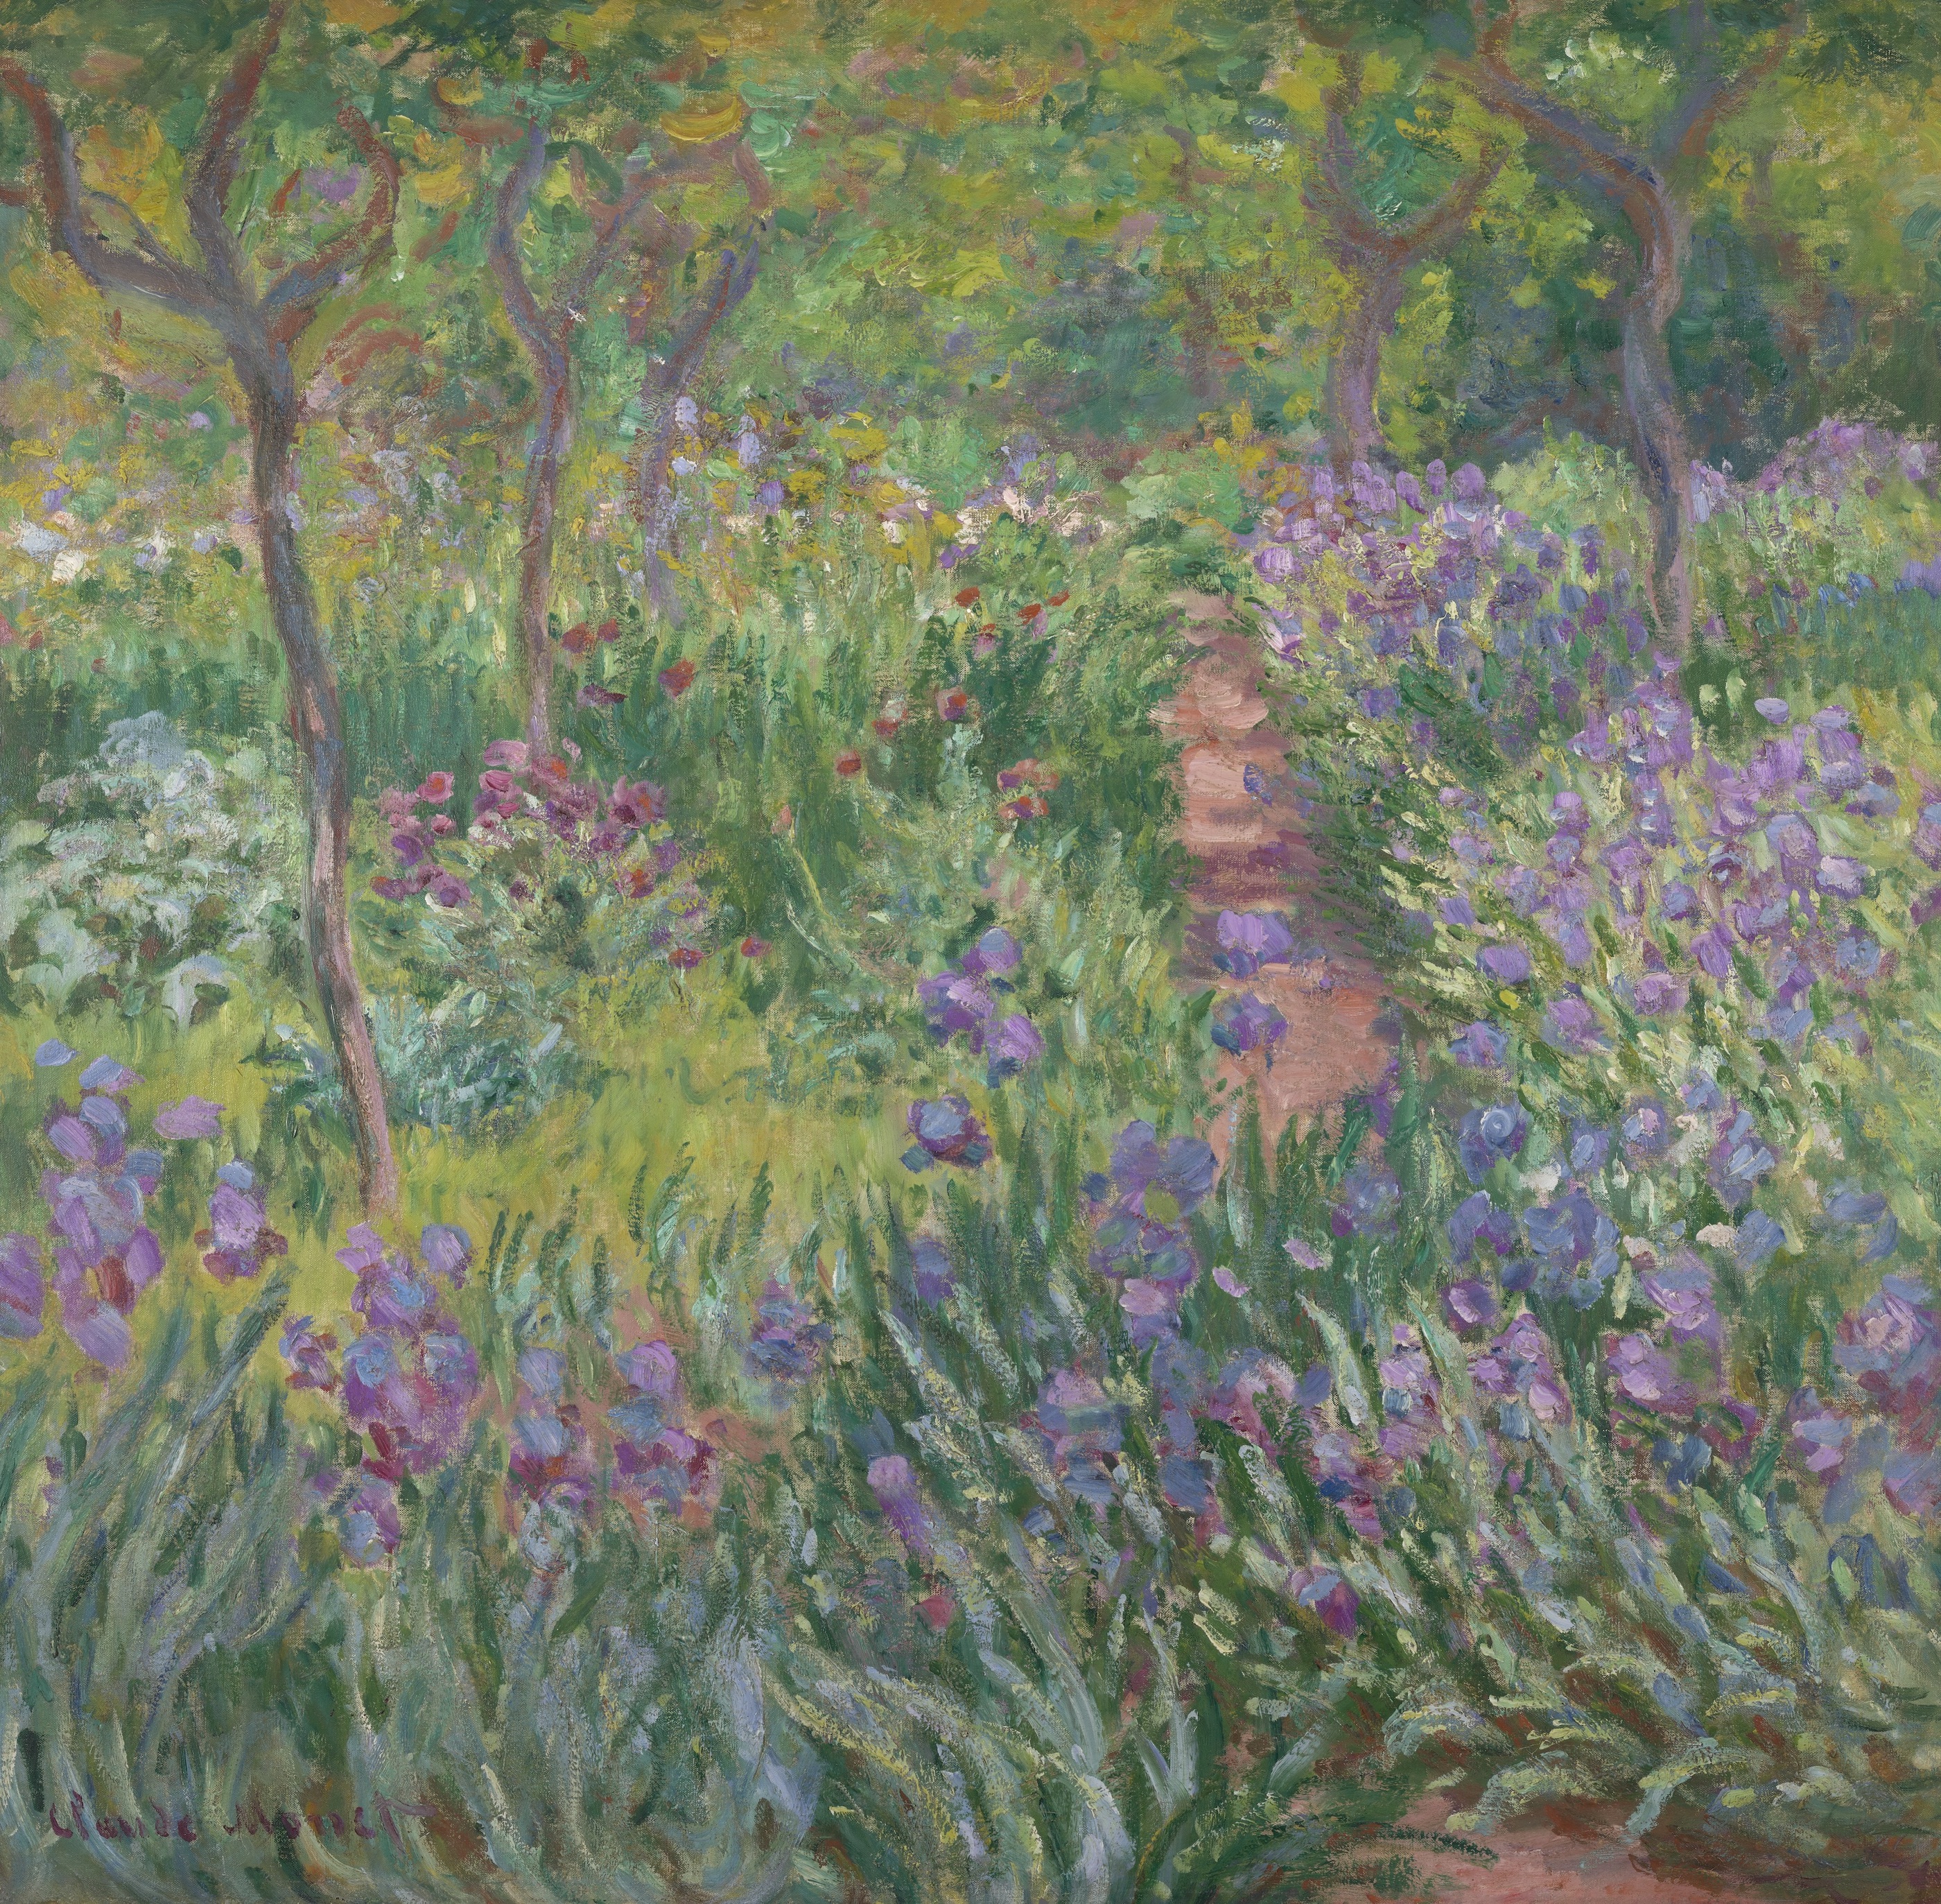 Ogród artysty w Giverny by Claude Monet - 1900 - 89,5 × 92,1 cm 